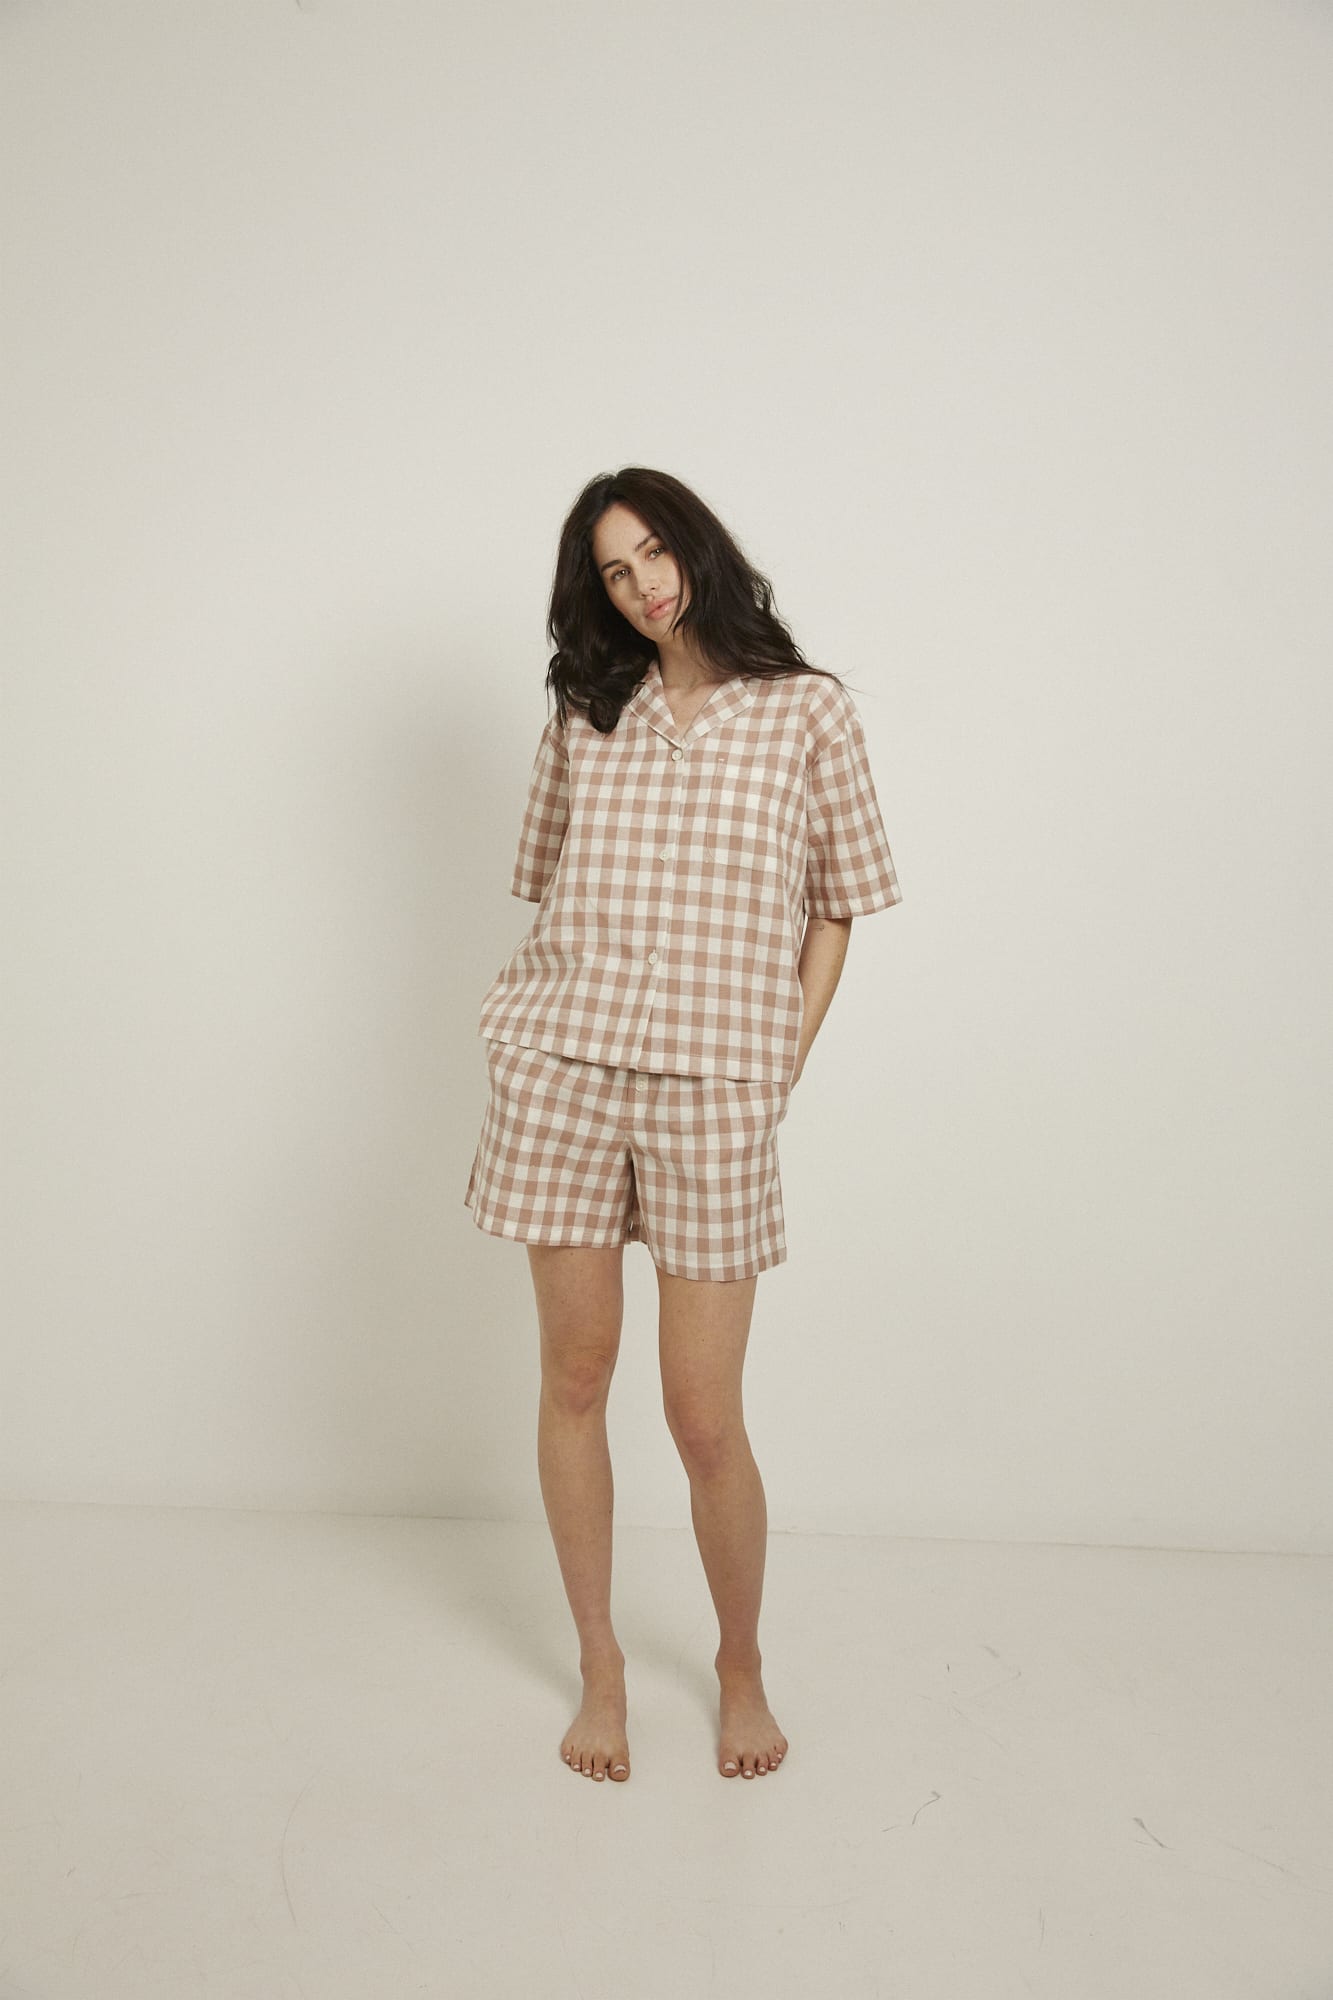 Women’s pyjama set including a short sleeve shirt and shorts. Made from an organic cotton and linen blend, in a pink and white check.  The shirt has shell buttons, a front pocket and a back pleat with locker loop detail.  The shorts feature natural shell buttons and an elasticated waistband for comfort.